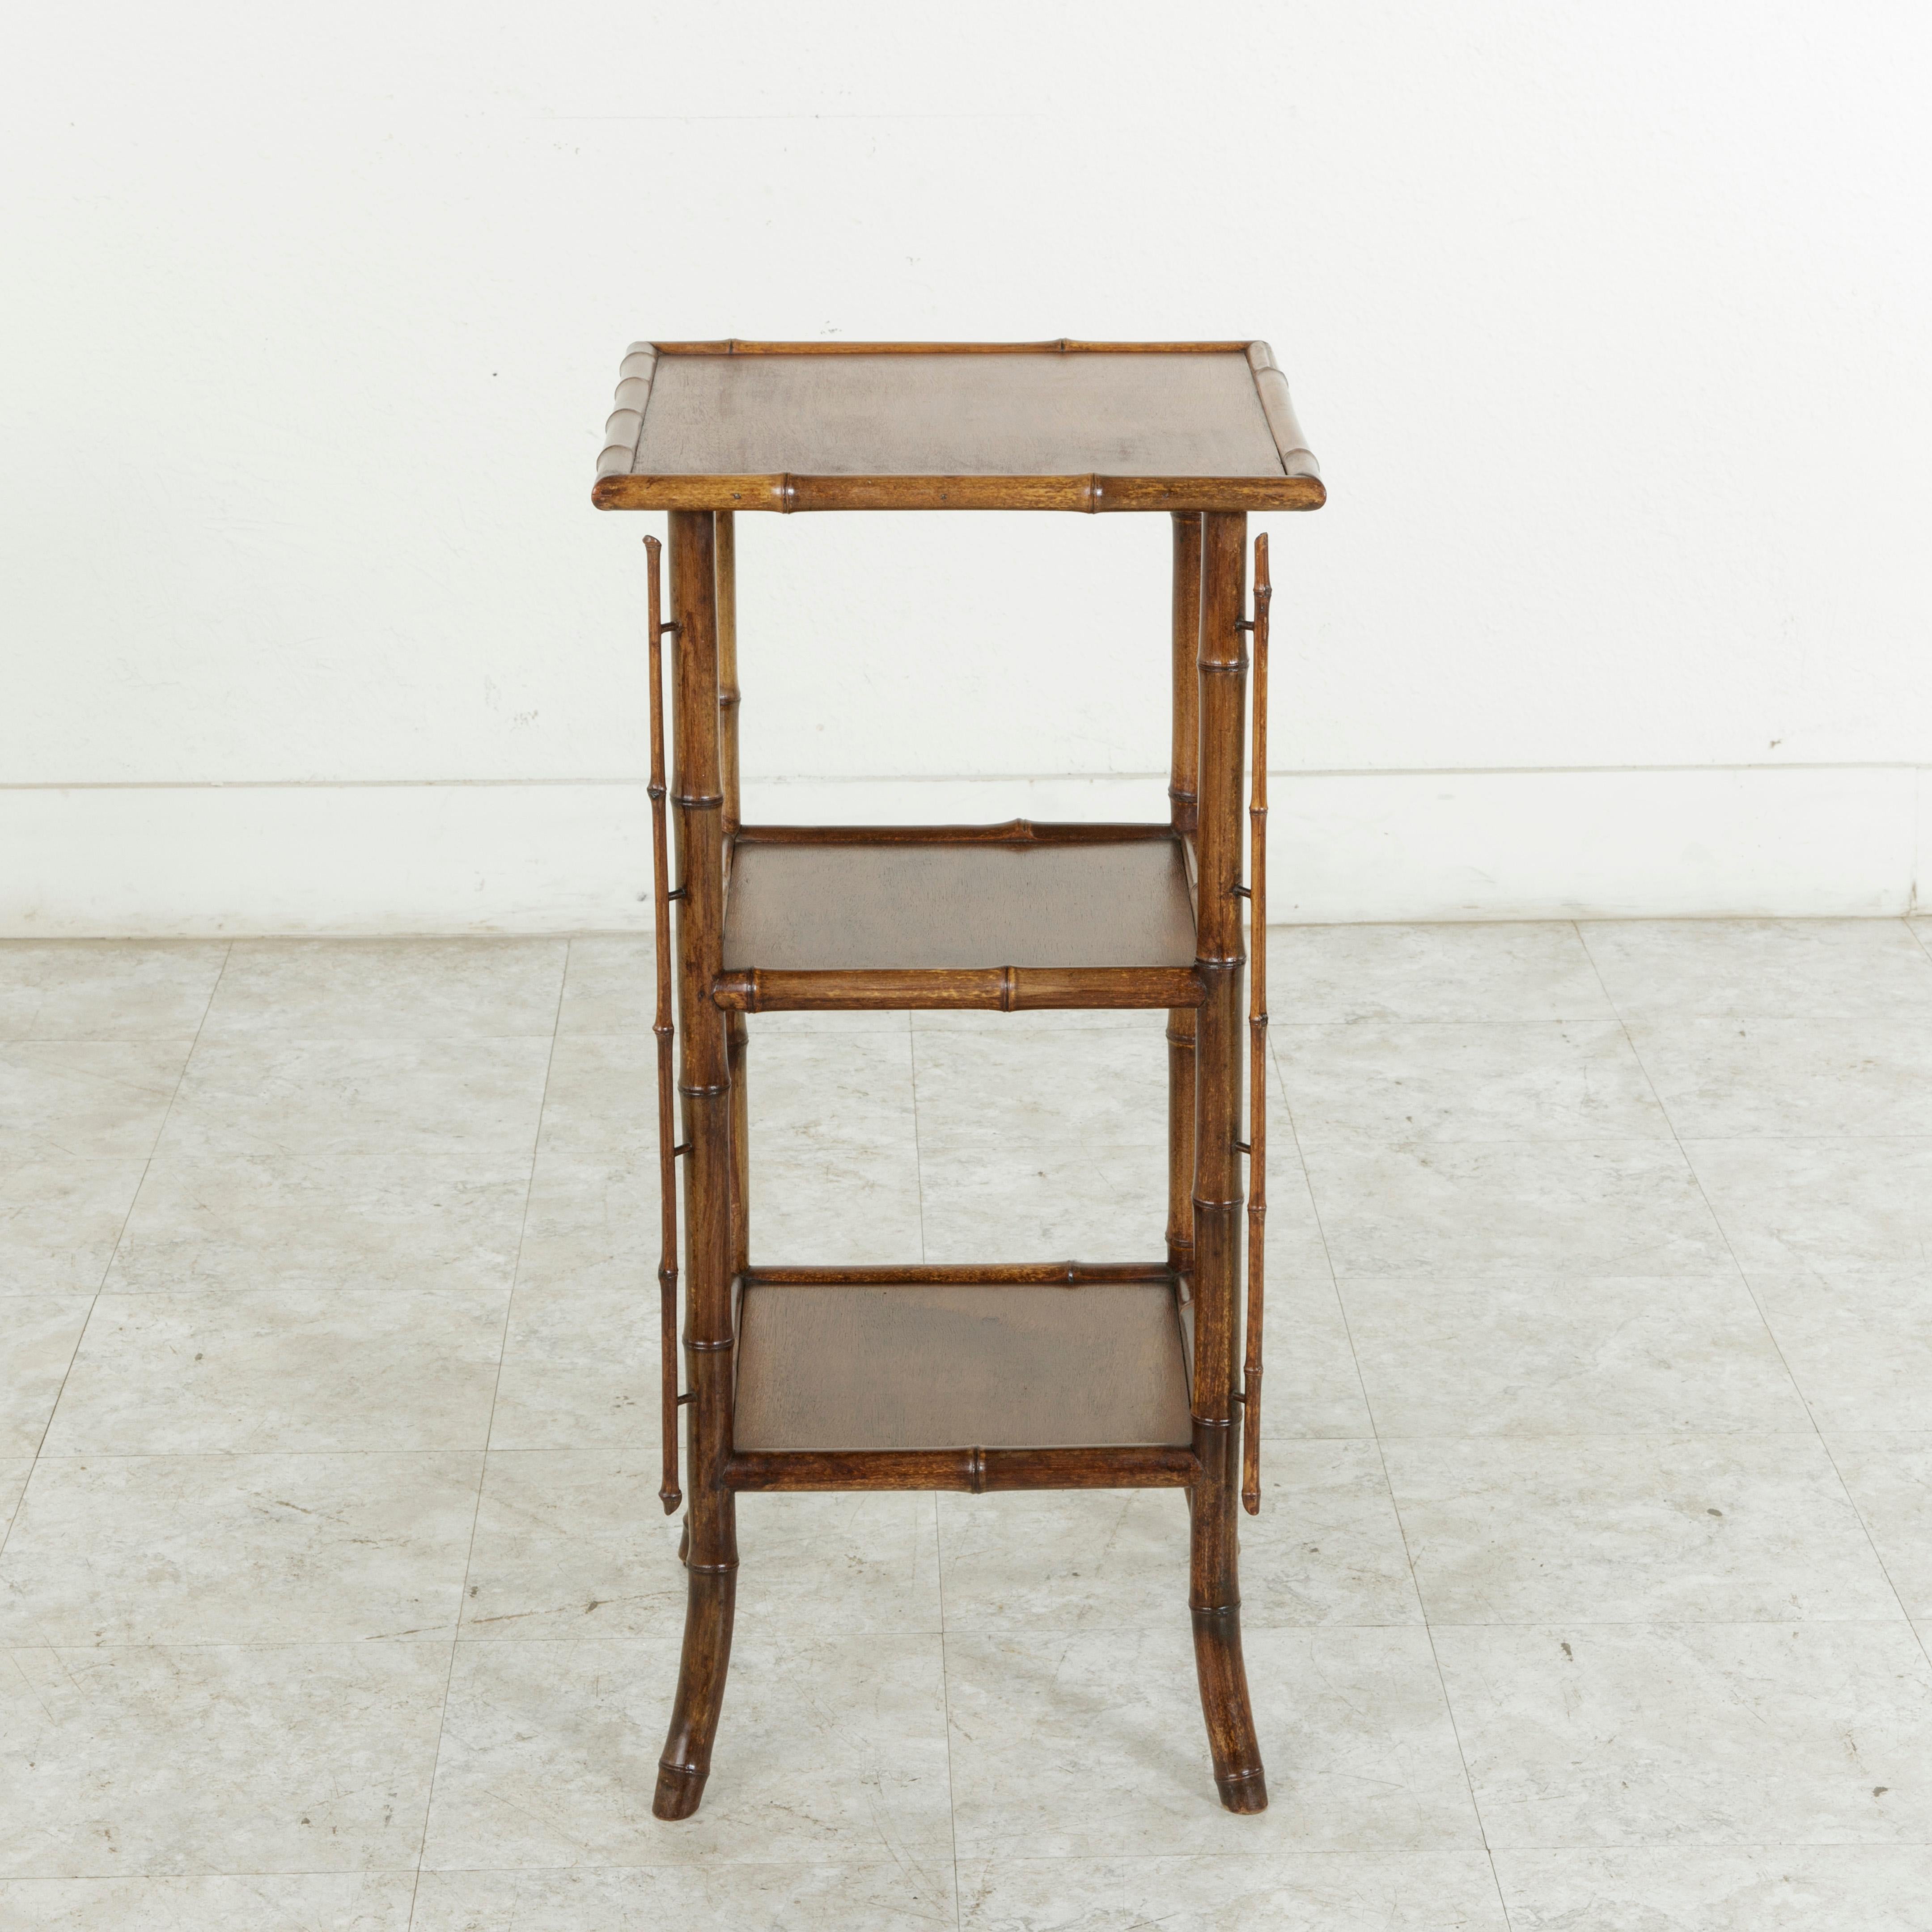 Early 20th Century French Bamboo Fern Stand or Side Table with Three Mahogany Shelves, circa 1900